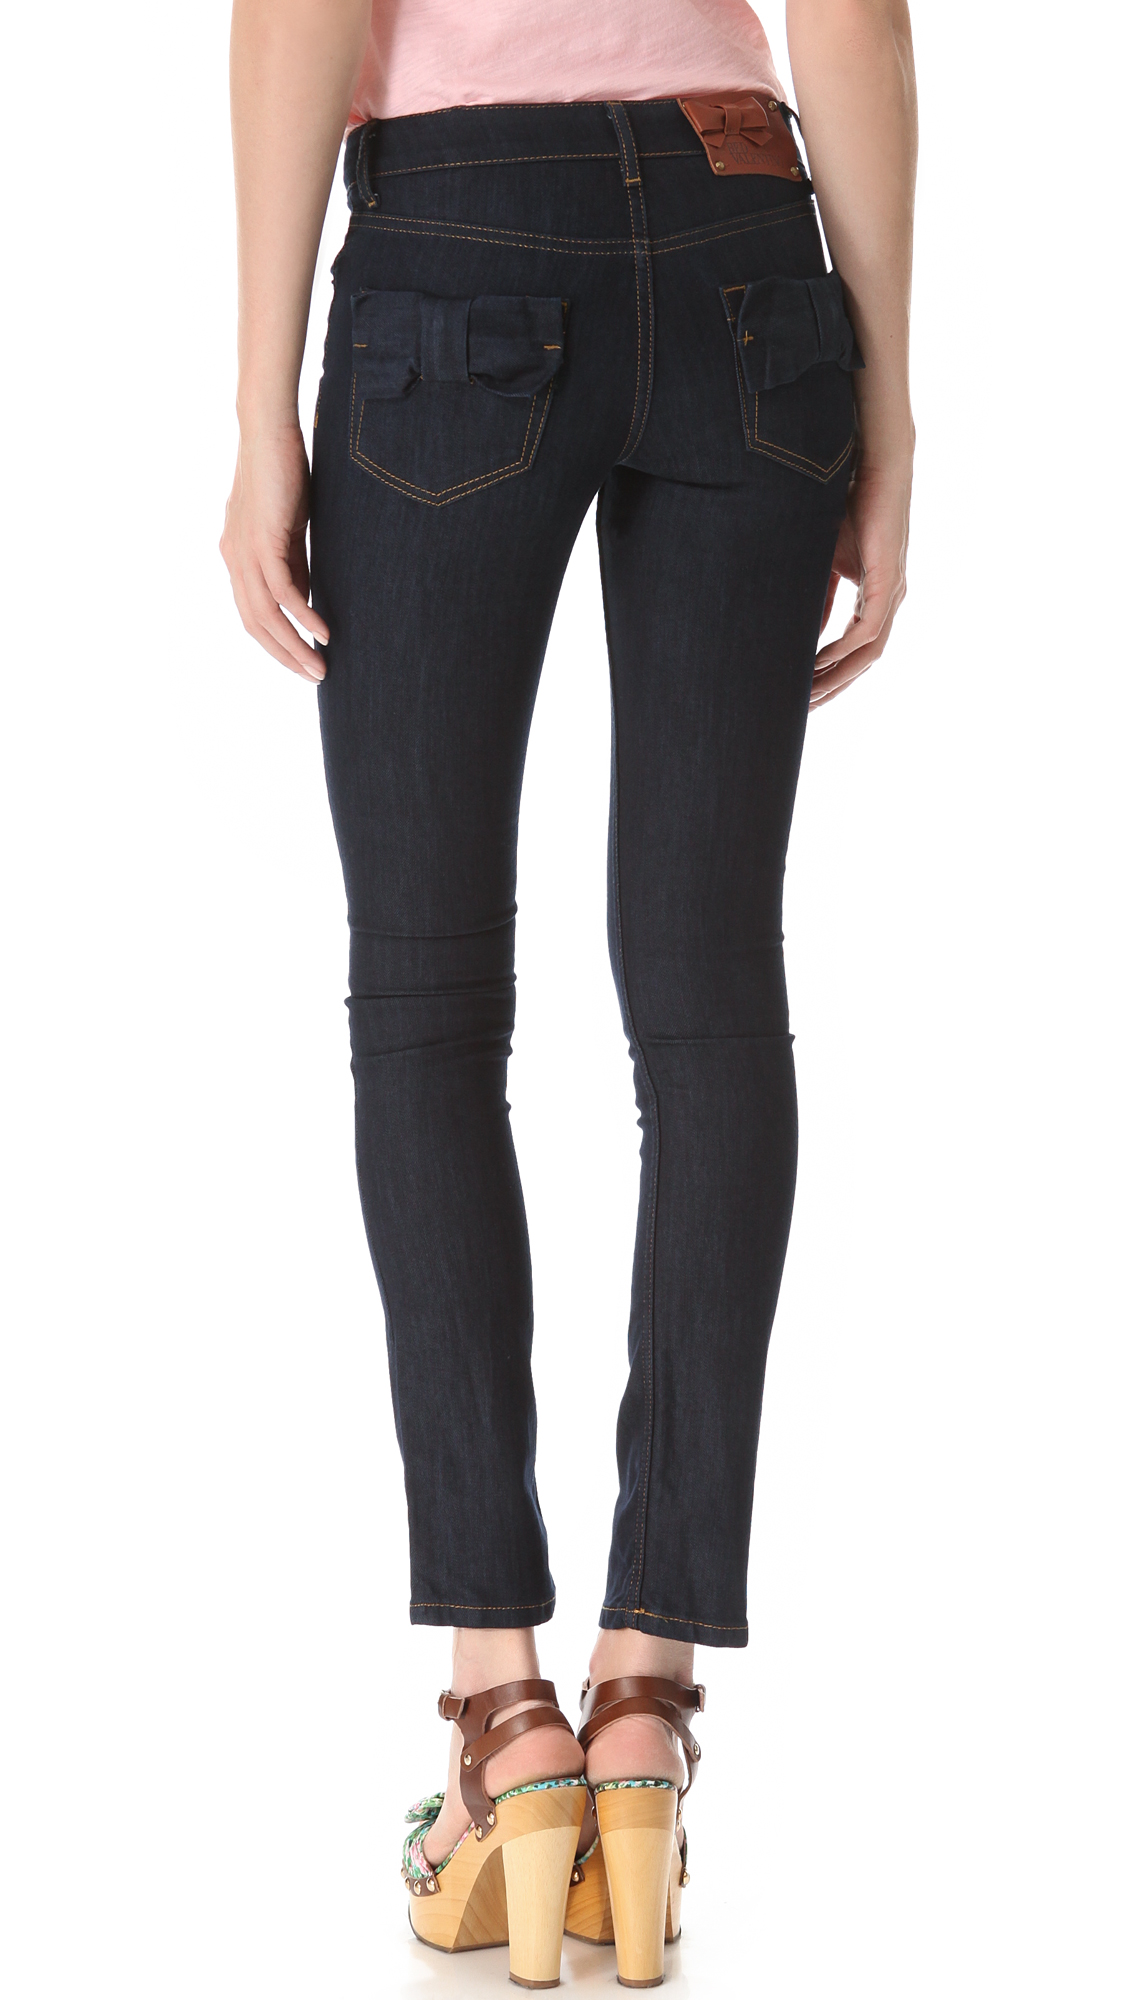 RED Valentino Bow Pocket Jeans in Blue |